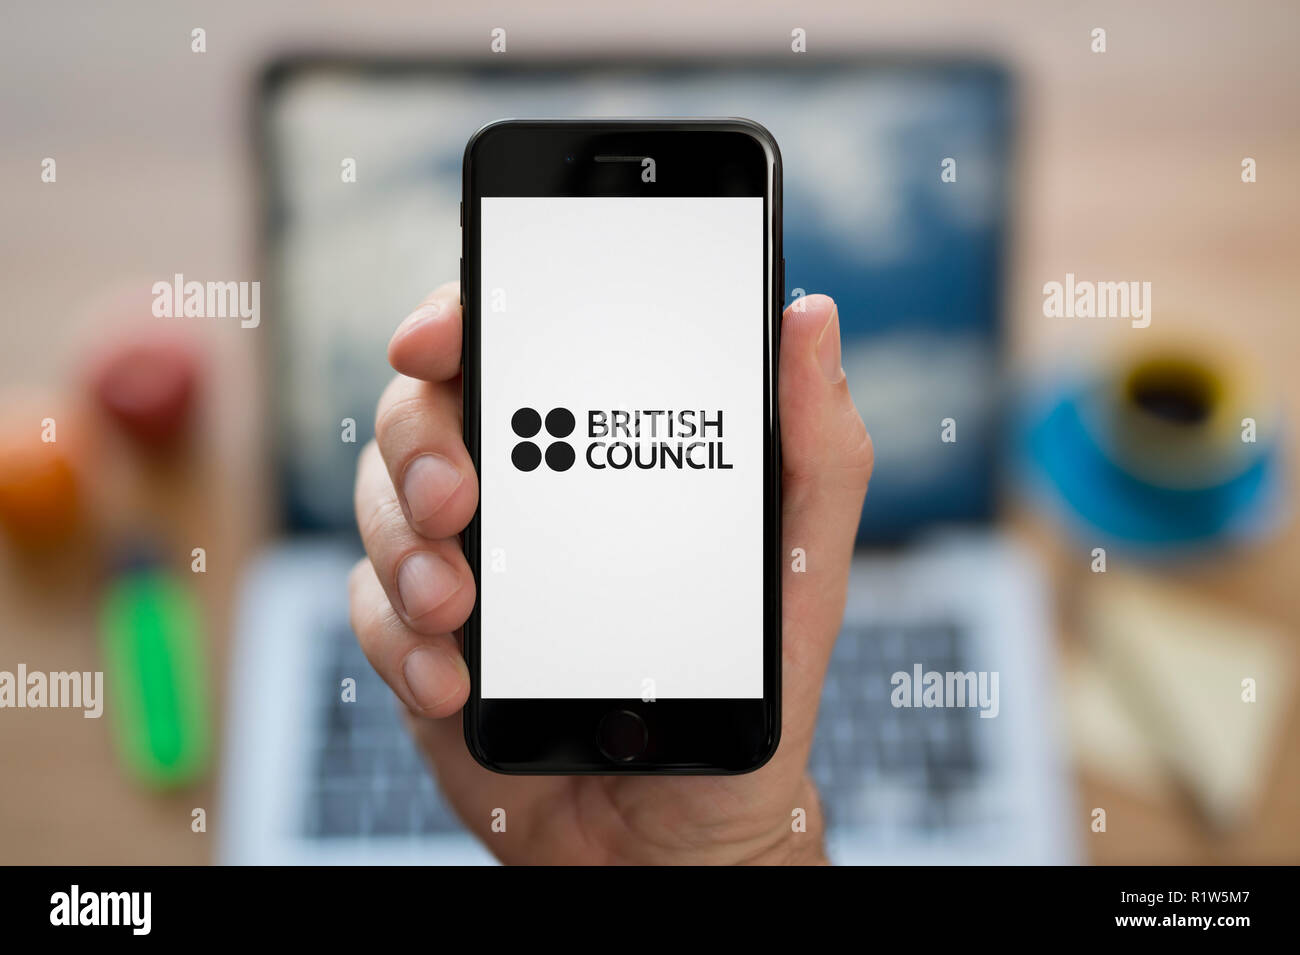 A man looks at his iPhone which displays the British Council logo, while sat at his computer desk (Editorial use only). Stock Photo